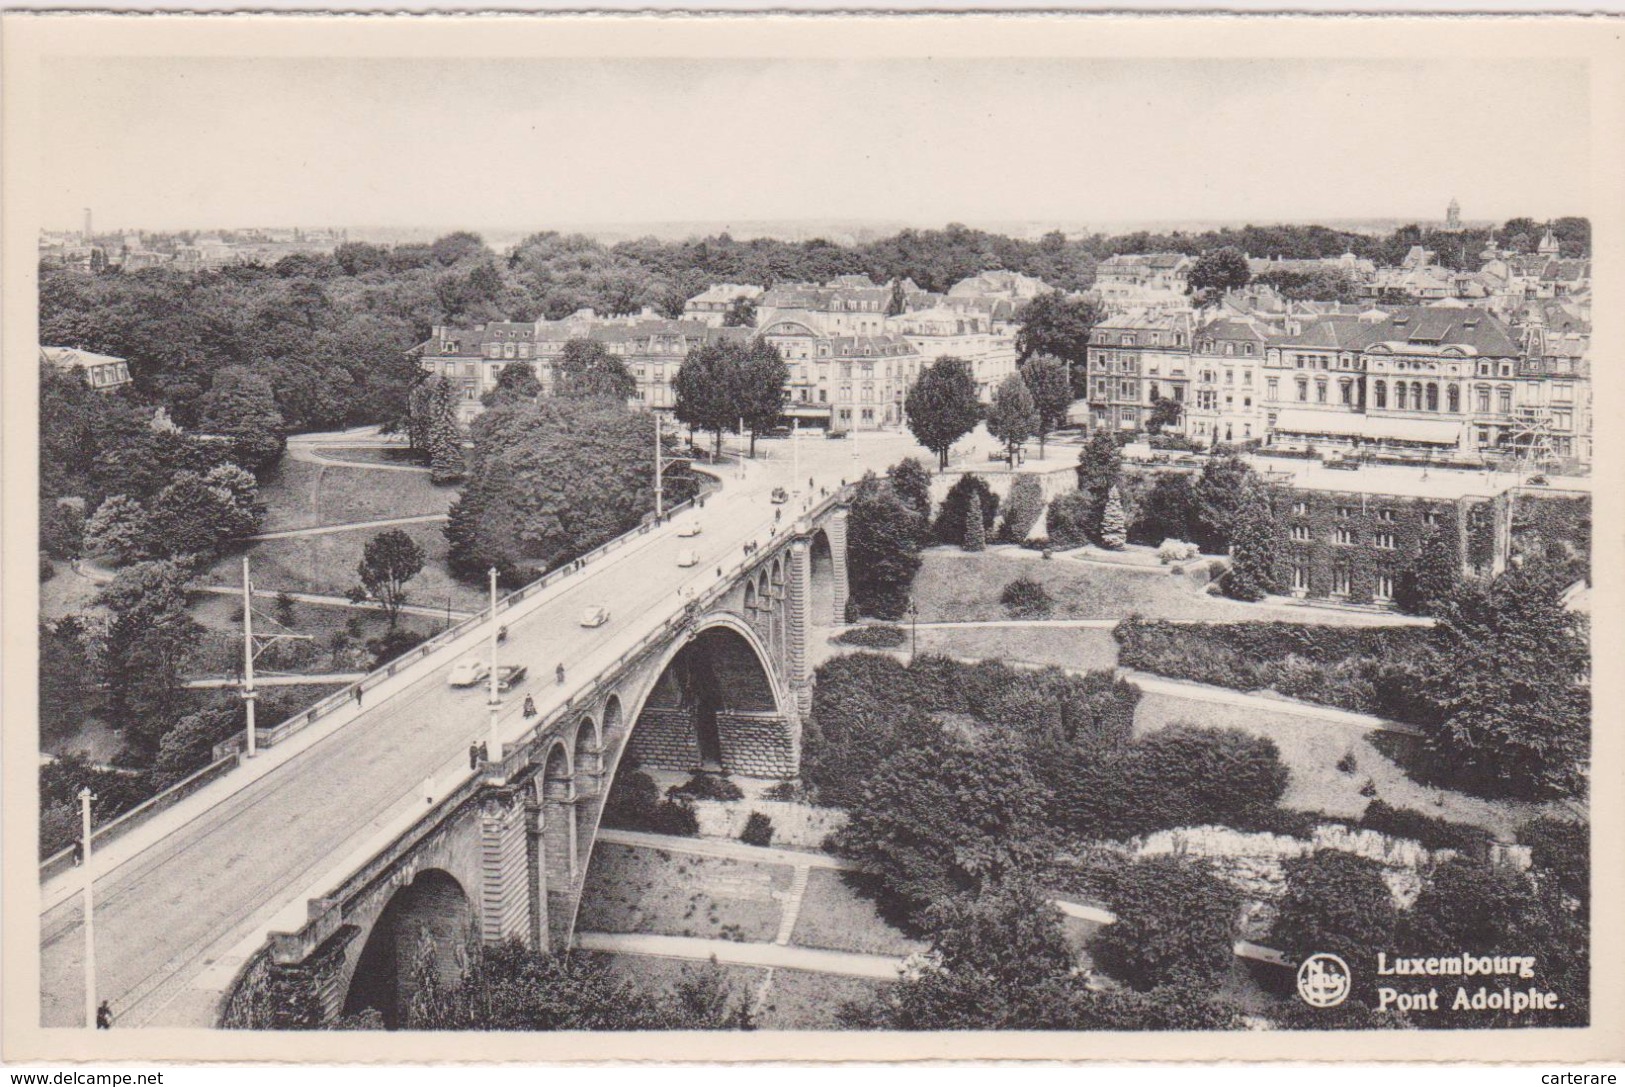 CARTE ANCIENNE,LUXEMBOURG,PONT ADOLPHE,PHOTO SCHAACK - Luxembourg - Ville